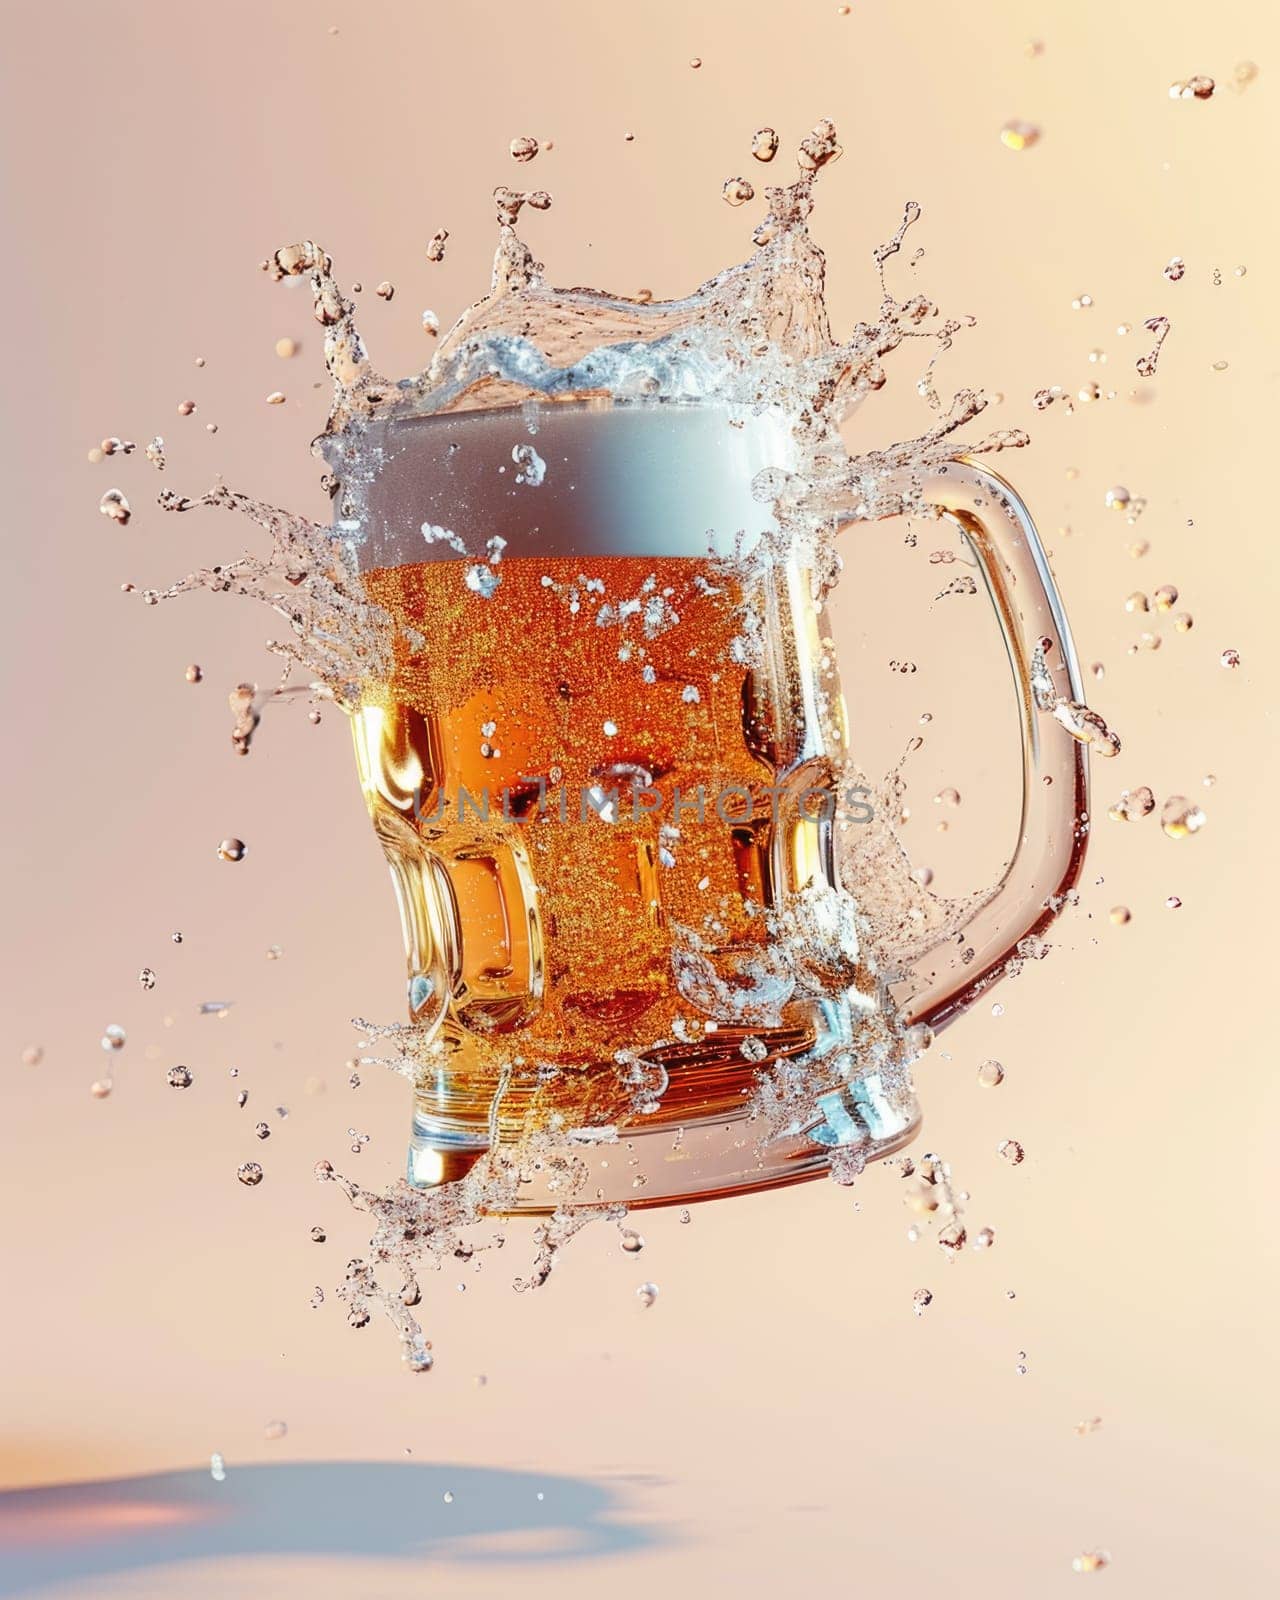 A mug of fresh beer in the air with spectacular splashes on a light background.